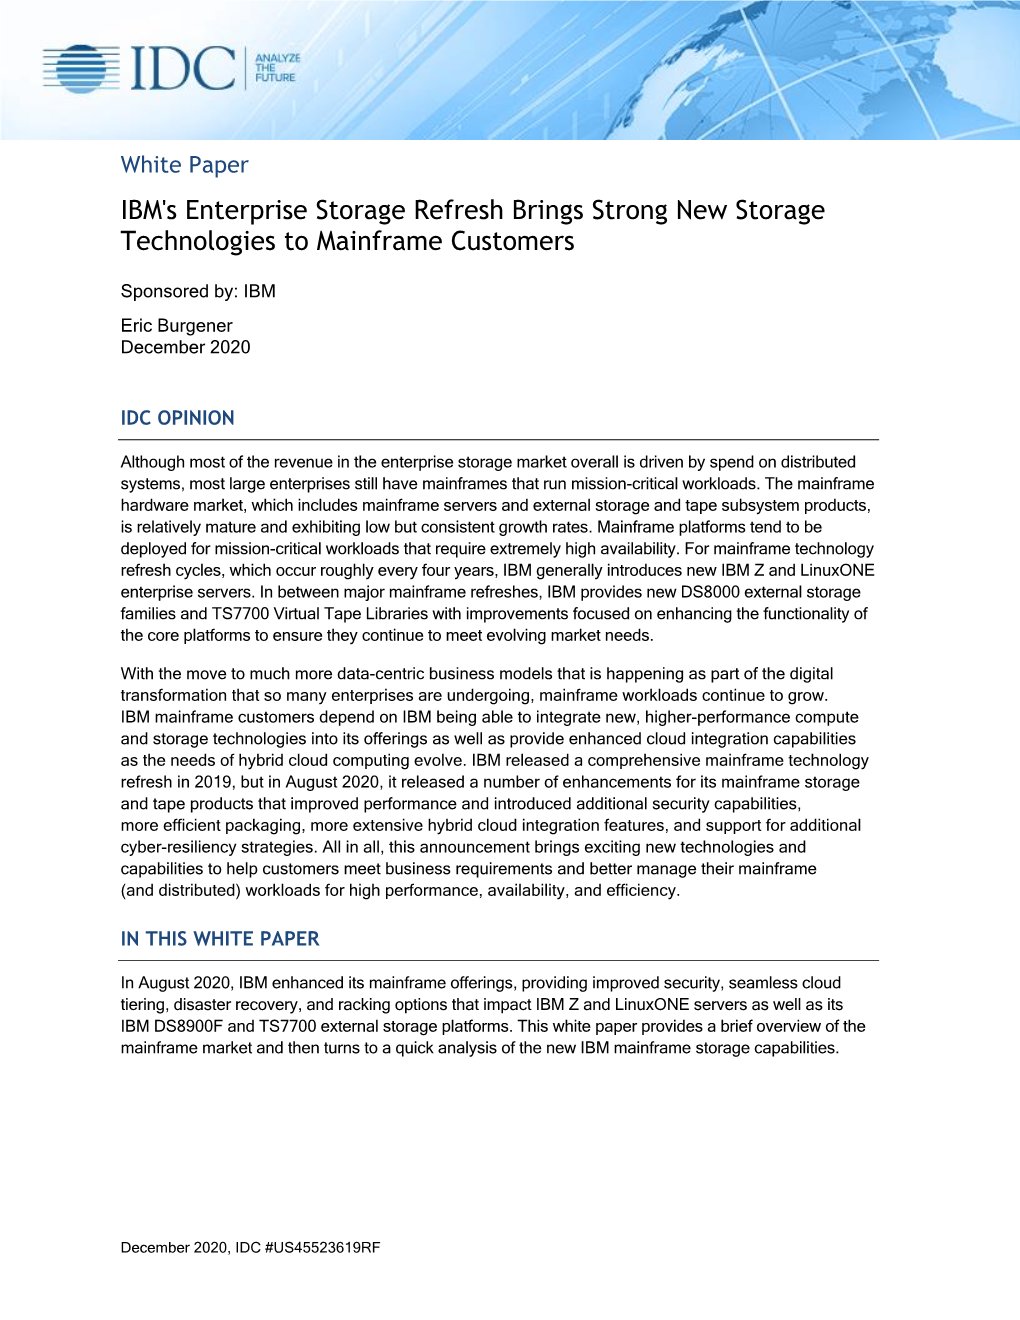 White Paper IBM's Enterprise Storage Refresh Brings Strong New Storage Technologies to Mainframe Customers